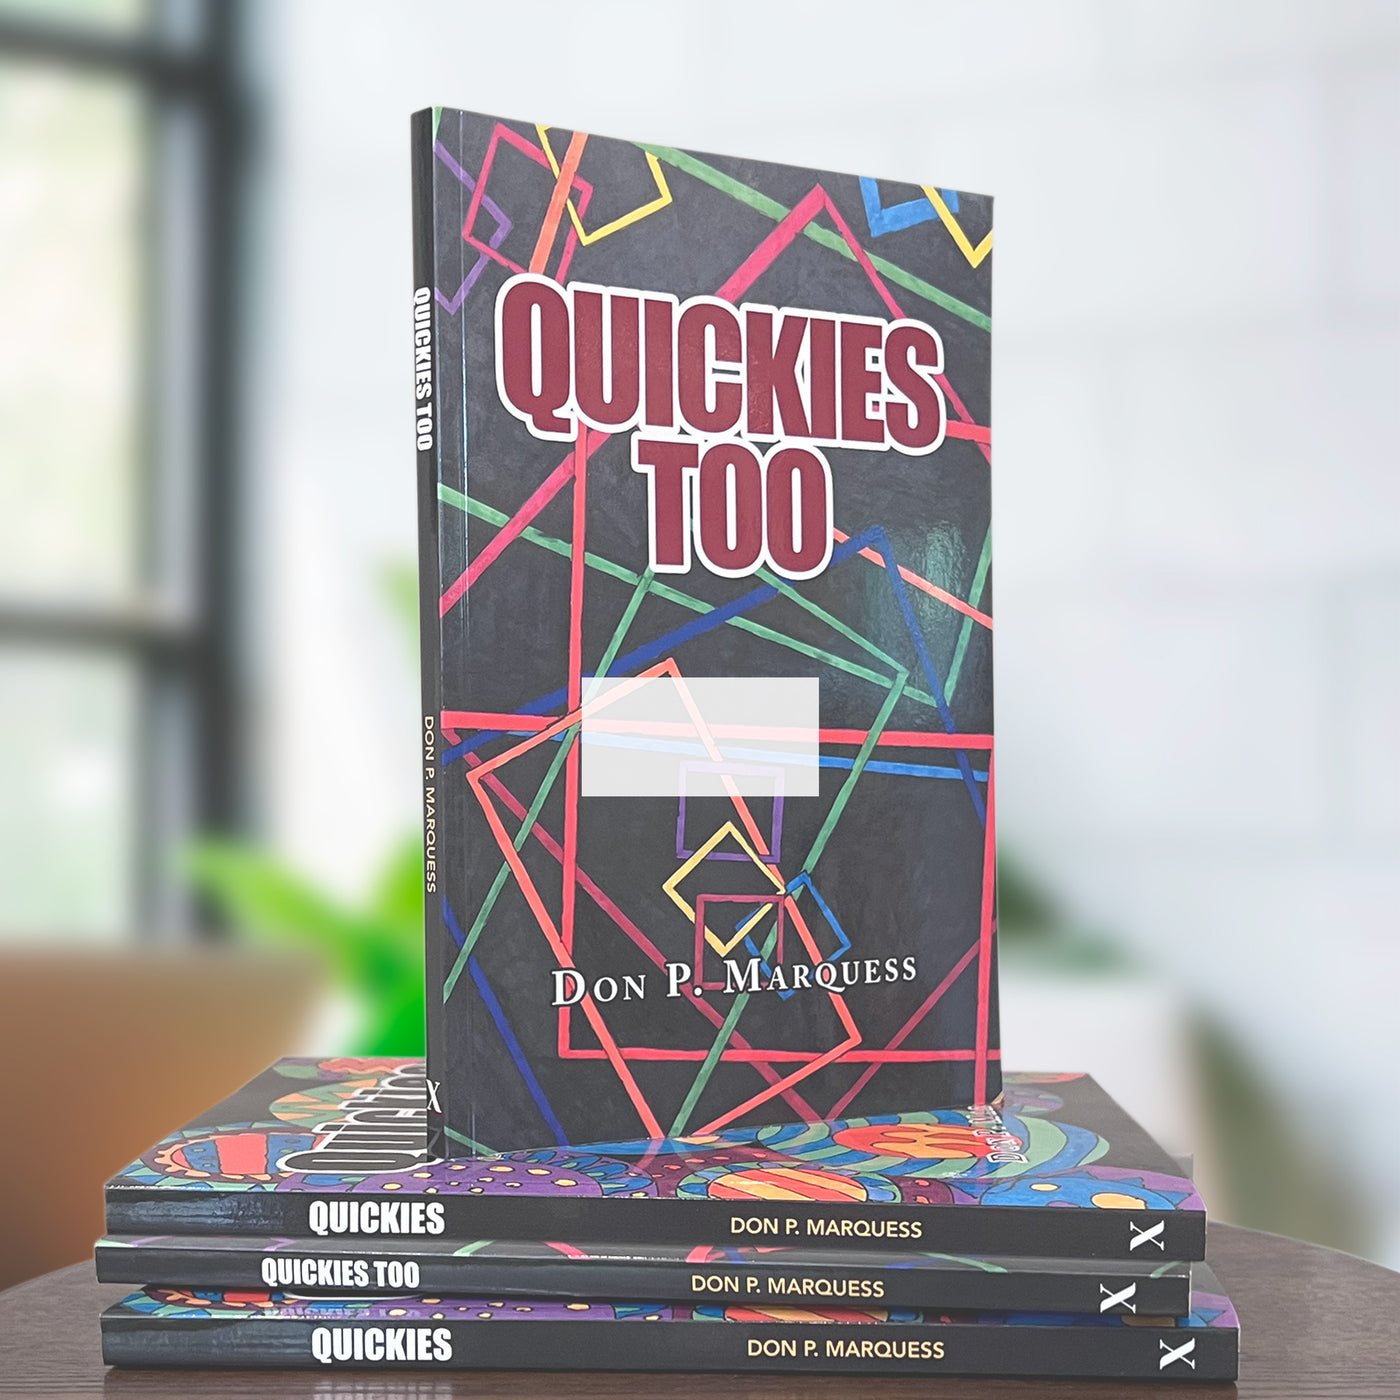 Quickies TOO | Collection of short stories by award winning professional photographer Don P. Marquess